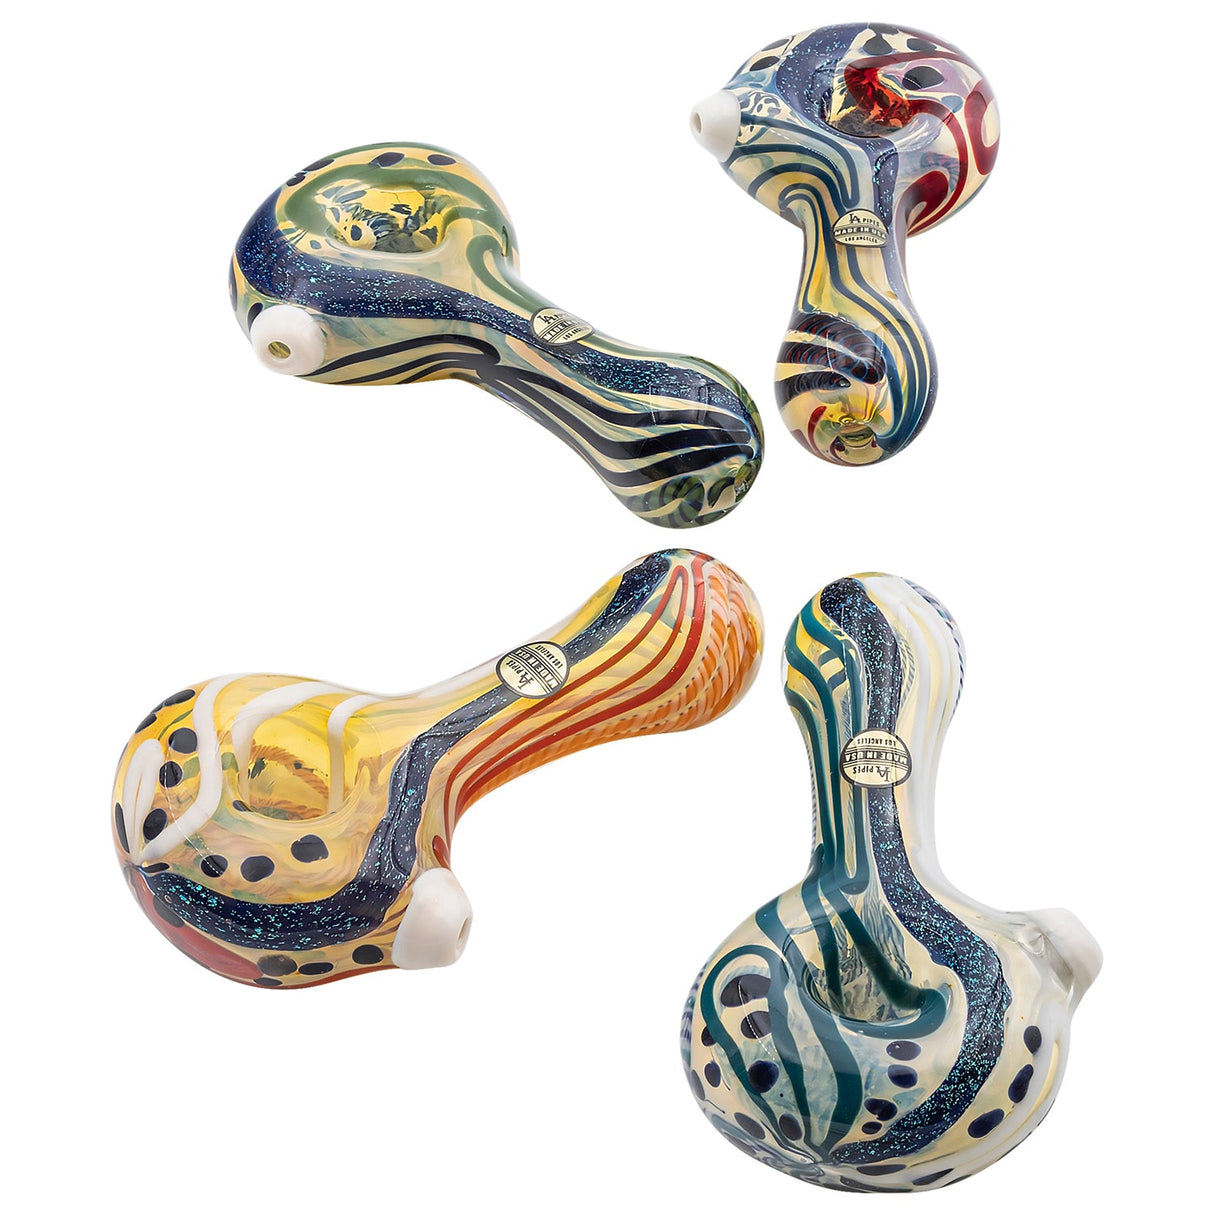 LA Pipes Pancake Dichroic Spoon Pipes in various color-changing designs, borosilicate glass